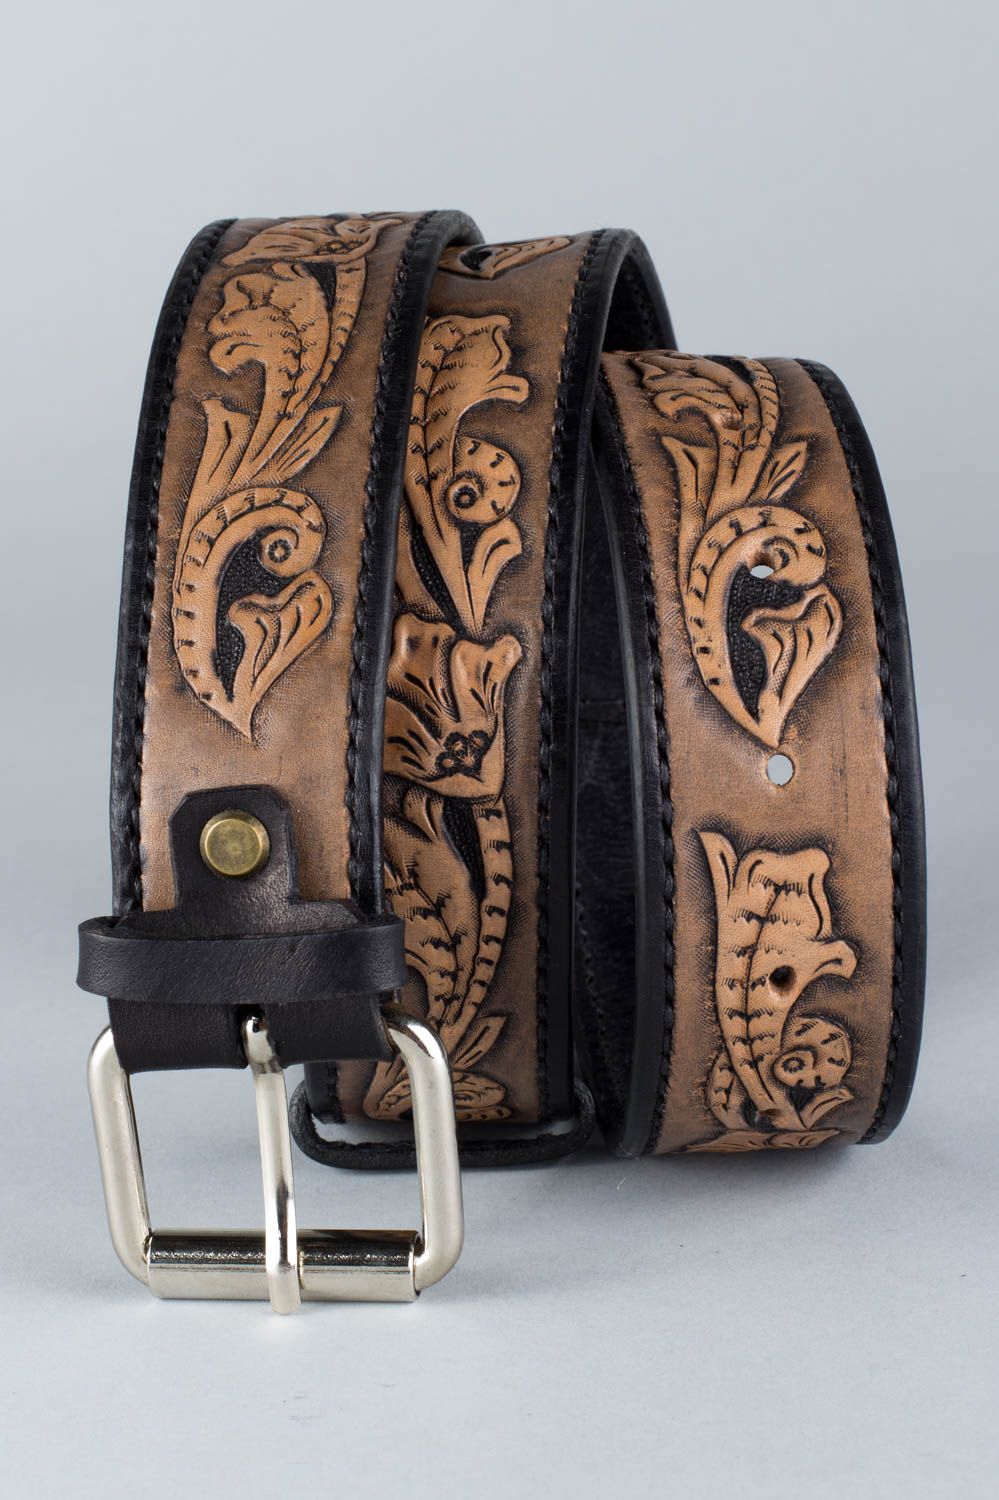 Handmade belt made of natural leather with metal buckle in Sheridan style photo 3